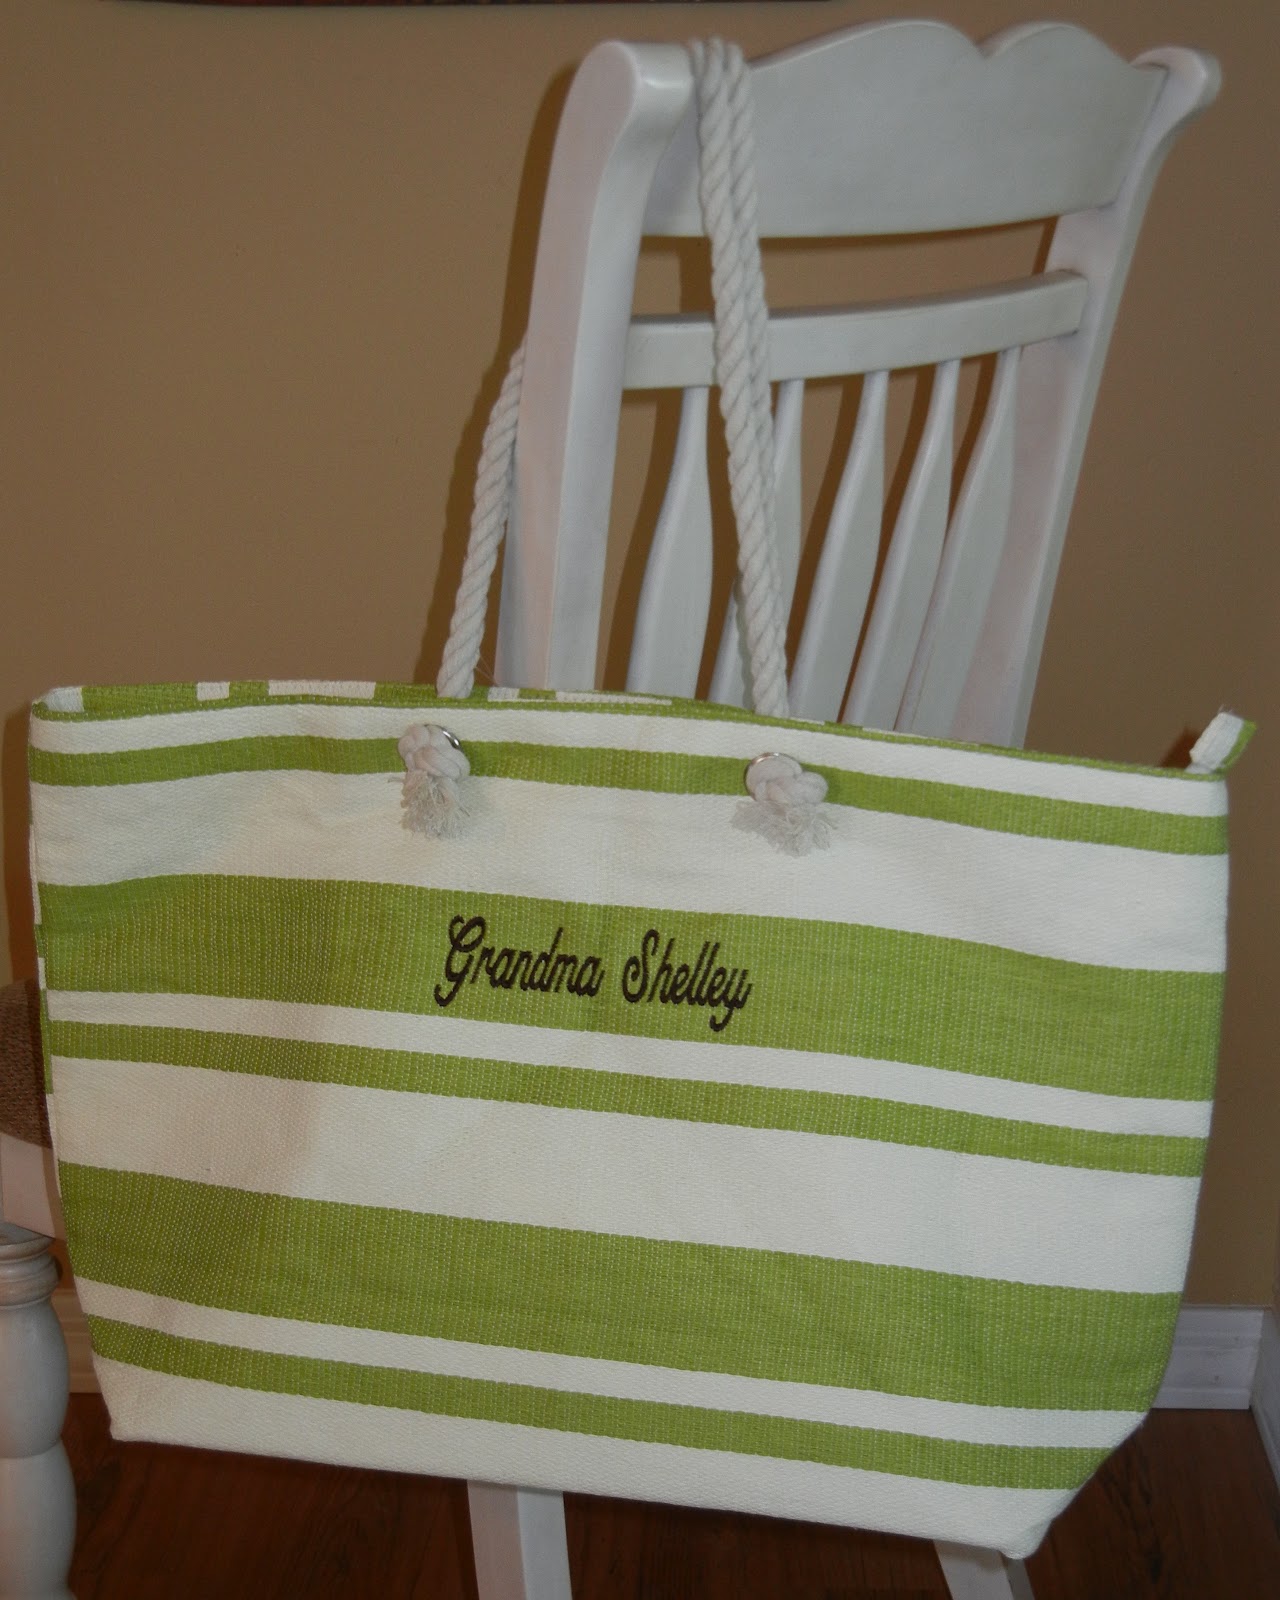 ... complimentary bag from their new line of 2012 beach bags check it out